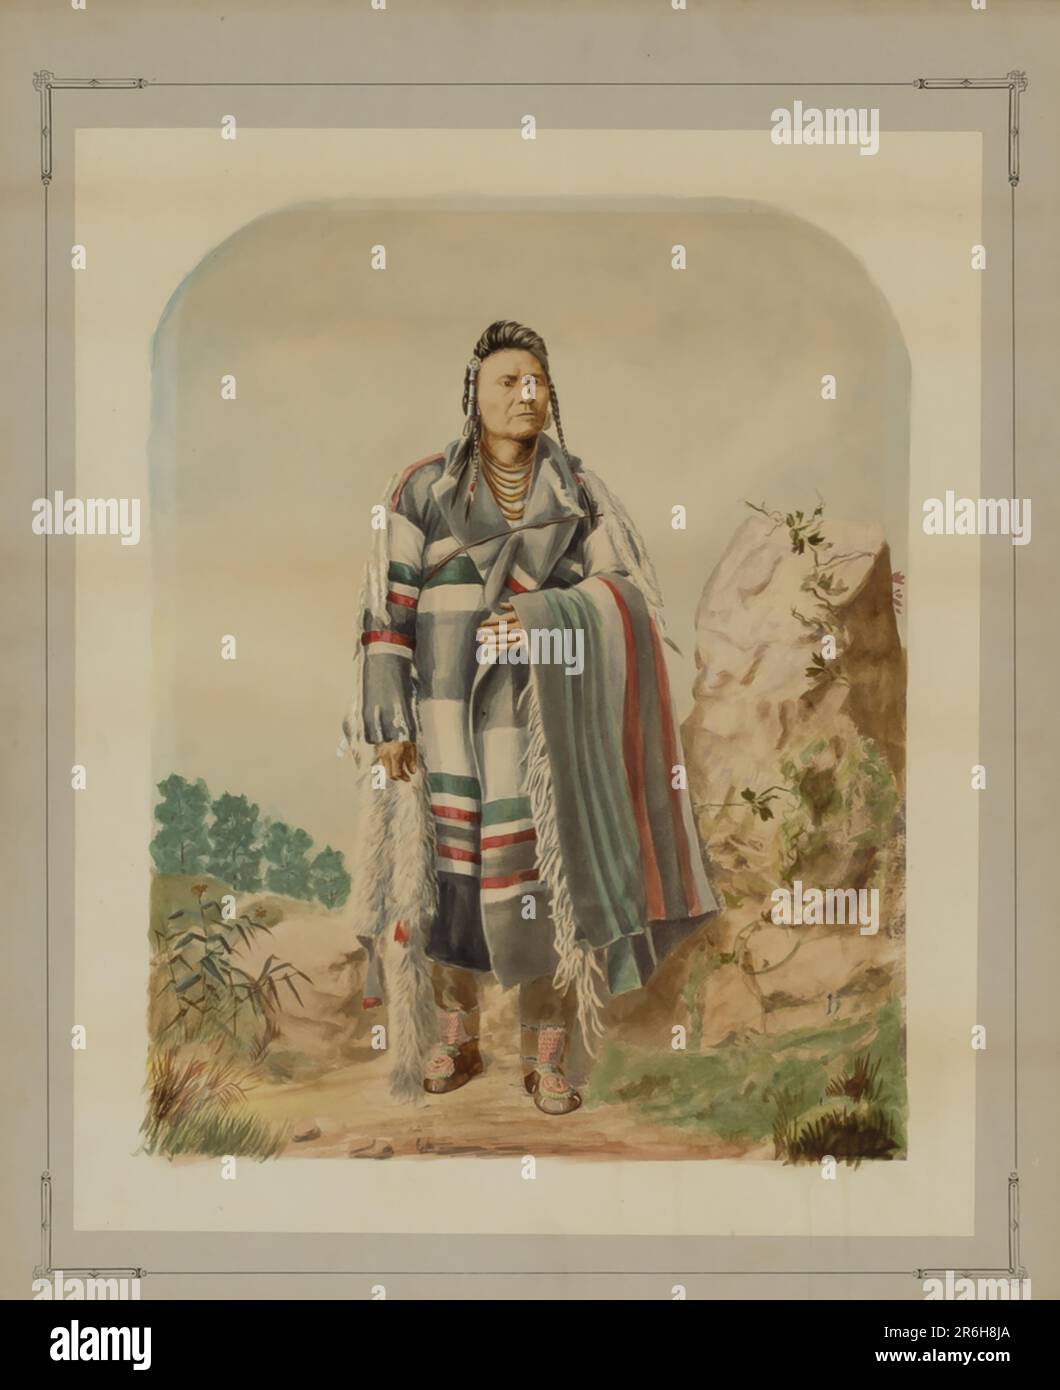 Chief Joseph of the Nez Perce. Date: ca. 1880. watercolor on paper mounted on paperboard. Museum: Smithsonian American Art Museum. Stock Photo